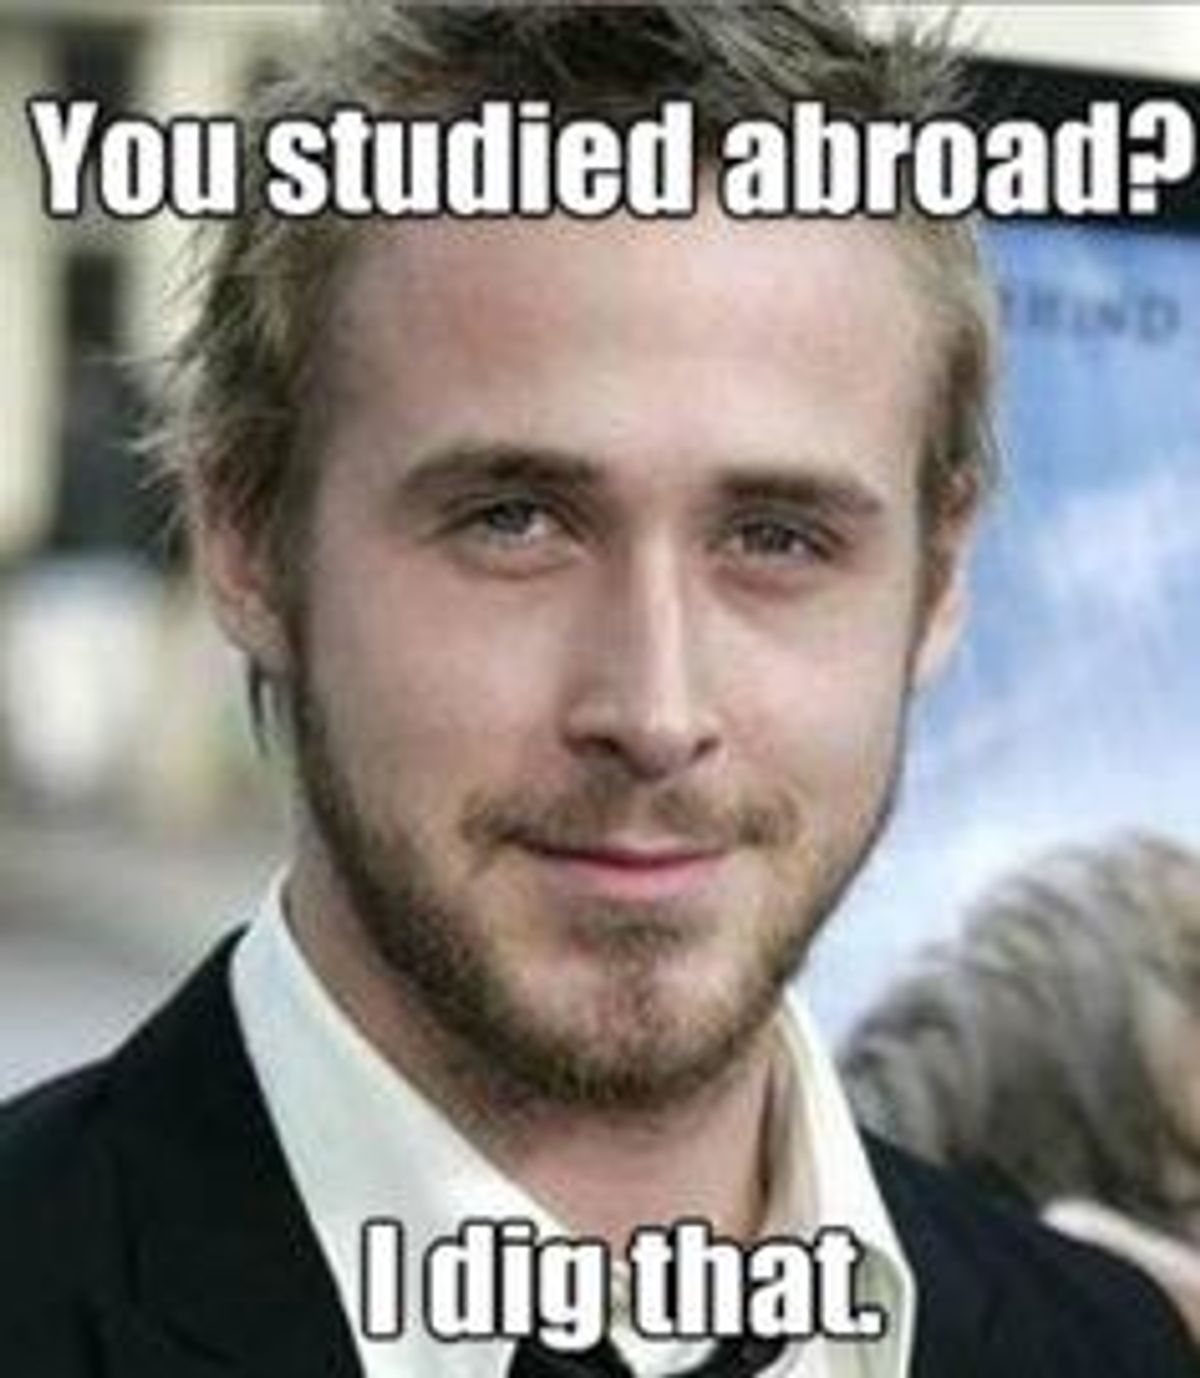 10 Memes That Perfectly Sum Up How You Feel When All Your Friends Are Studying Abroad